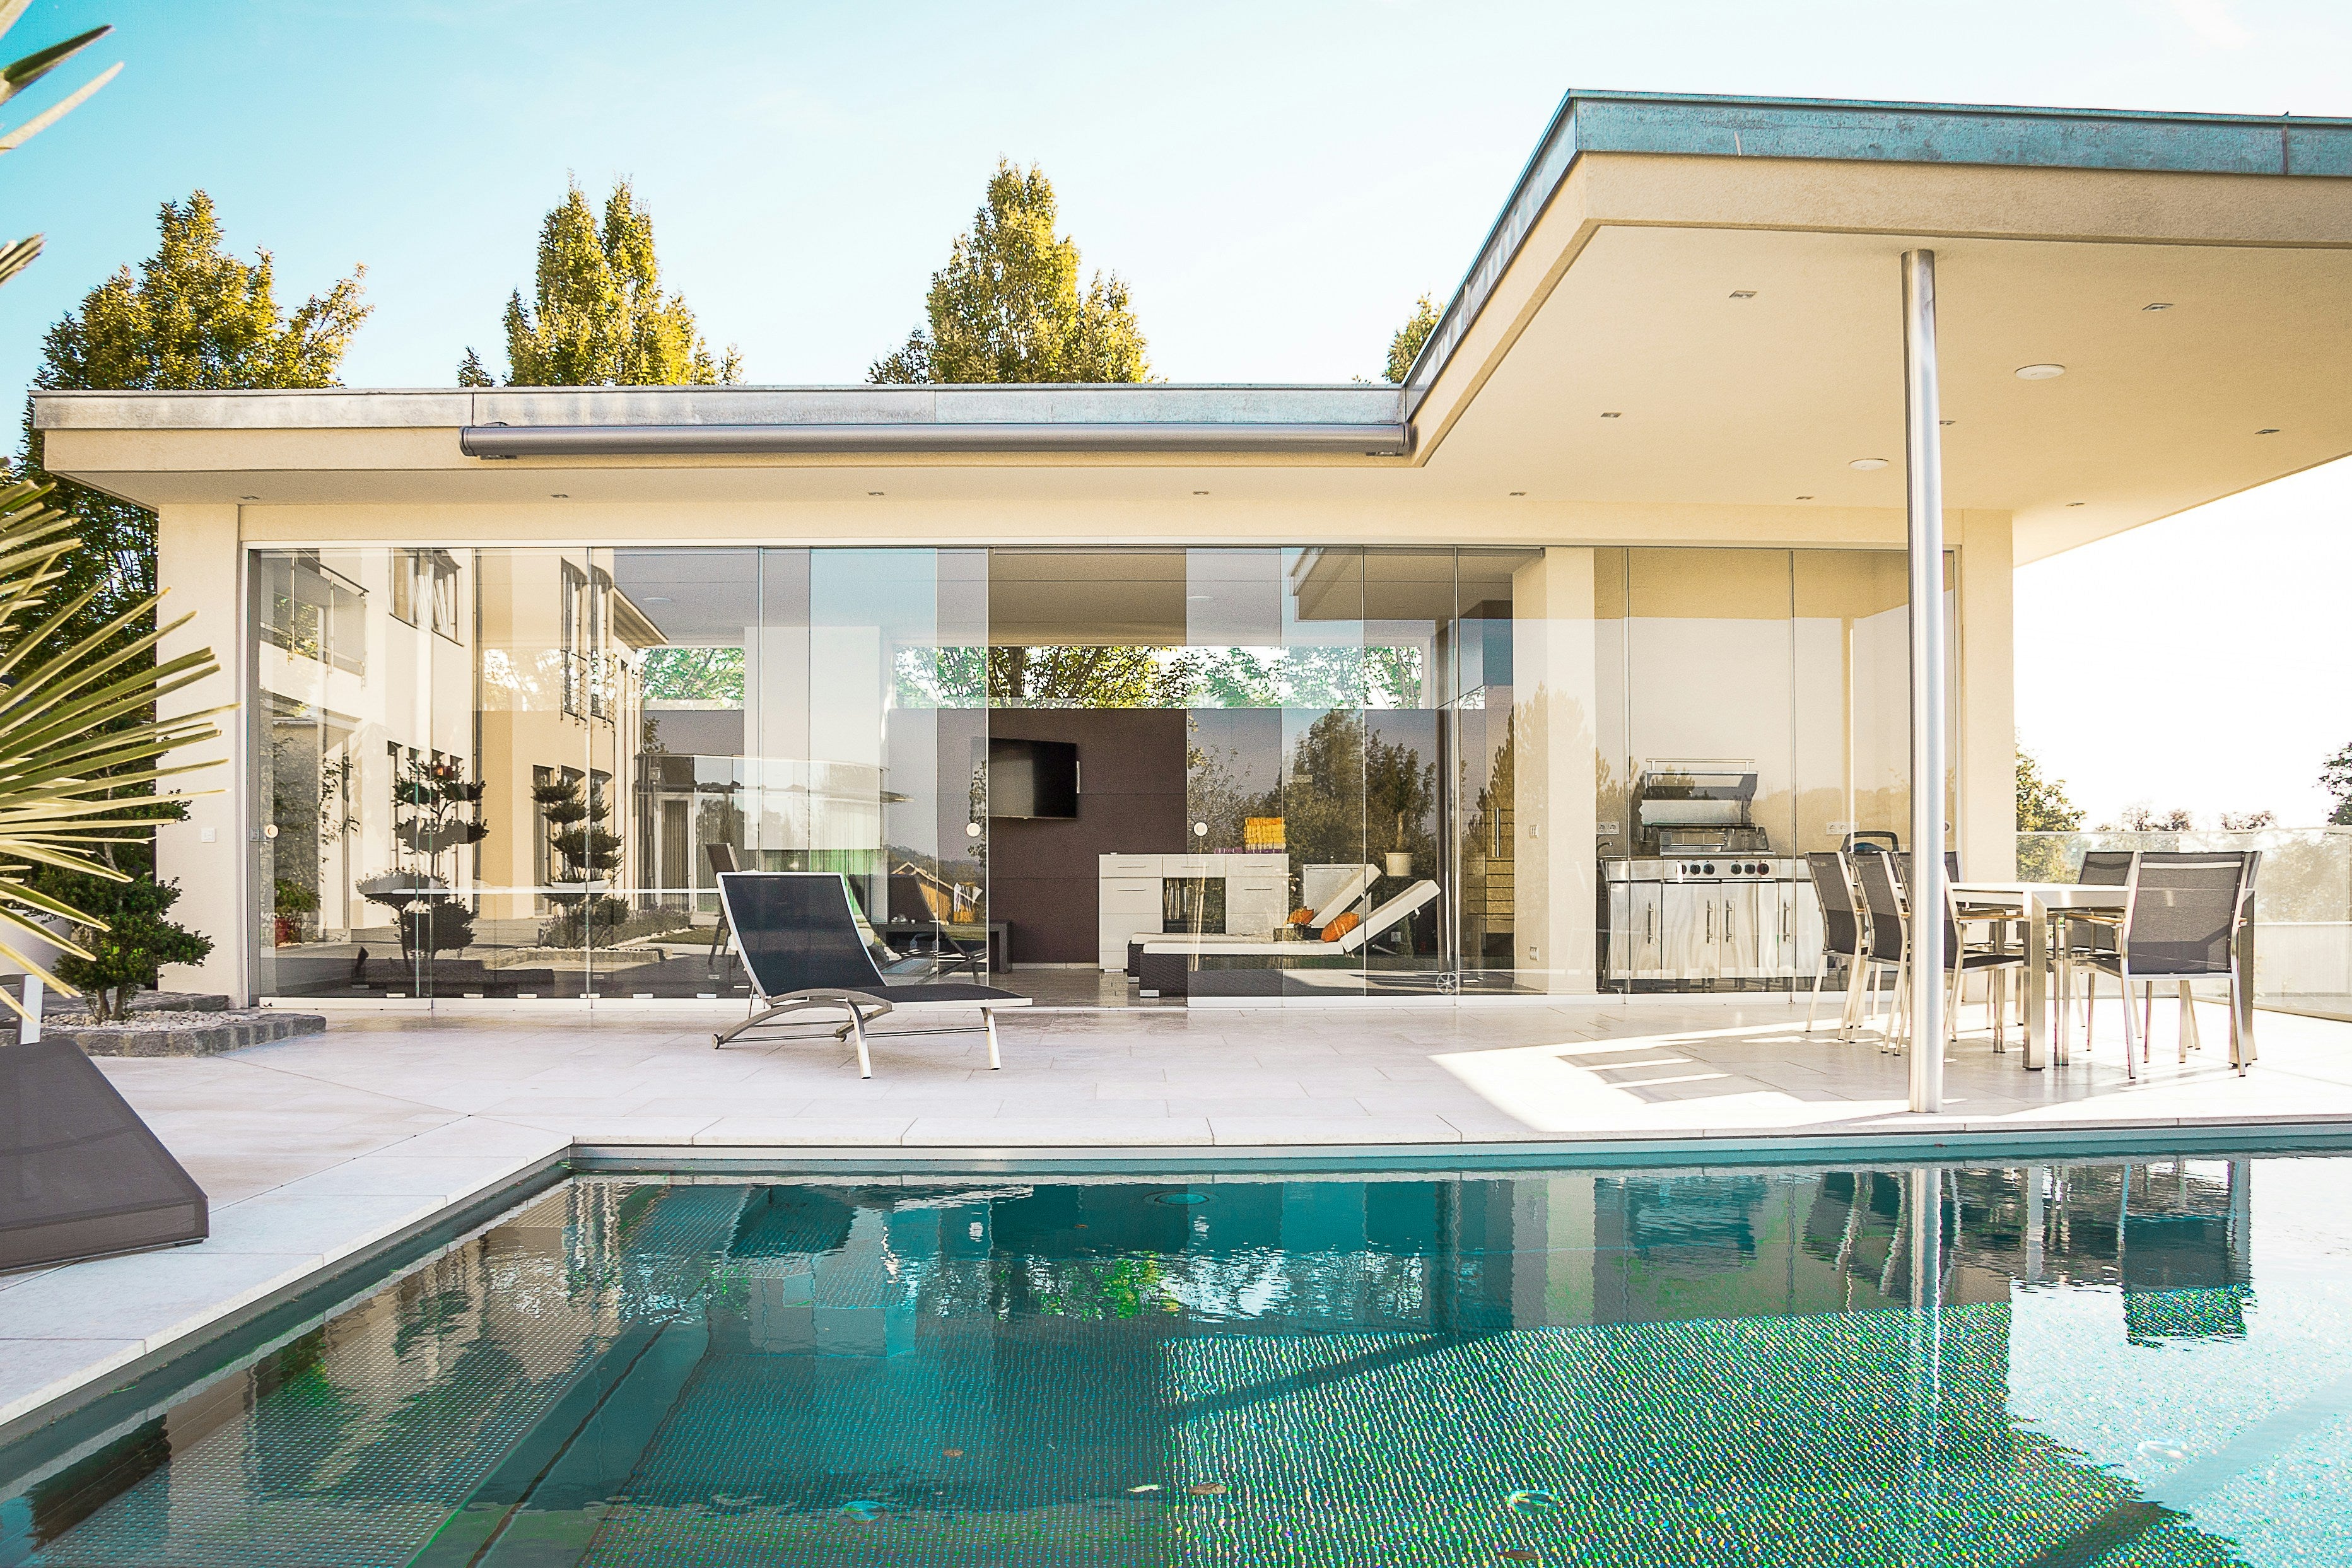 The Quintessential Architectural Styles to Recognize in Beverly Hills Villas